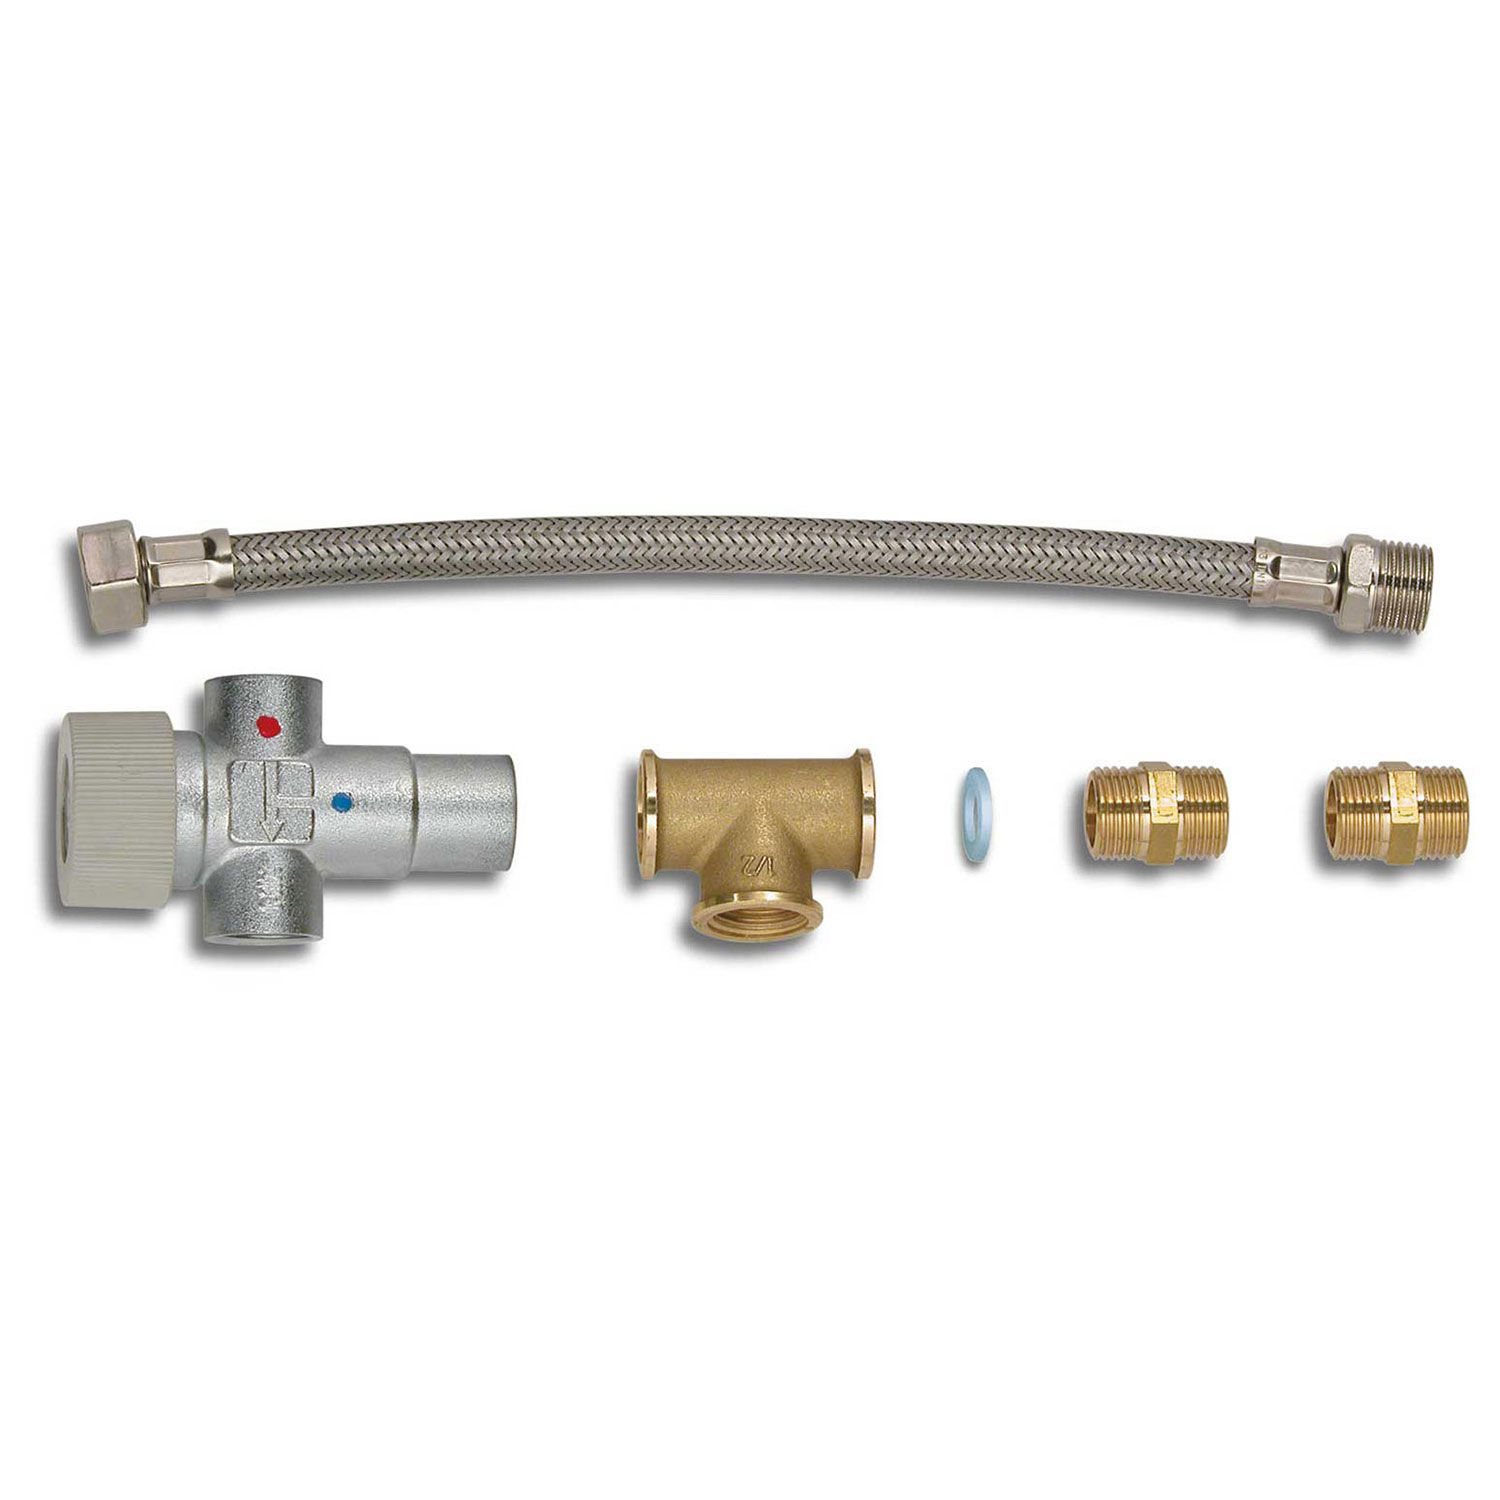 Quick Kmx Thermostatic Mixing Valve Kit For Water Heaters